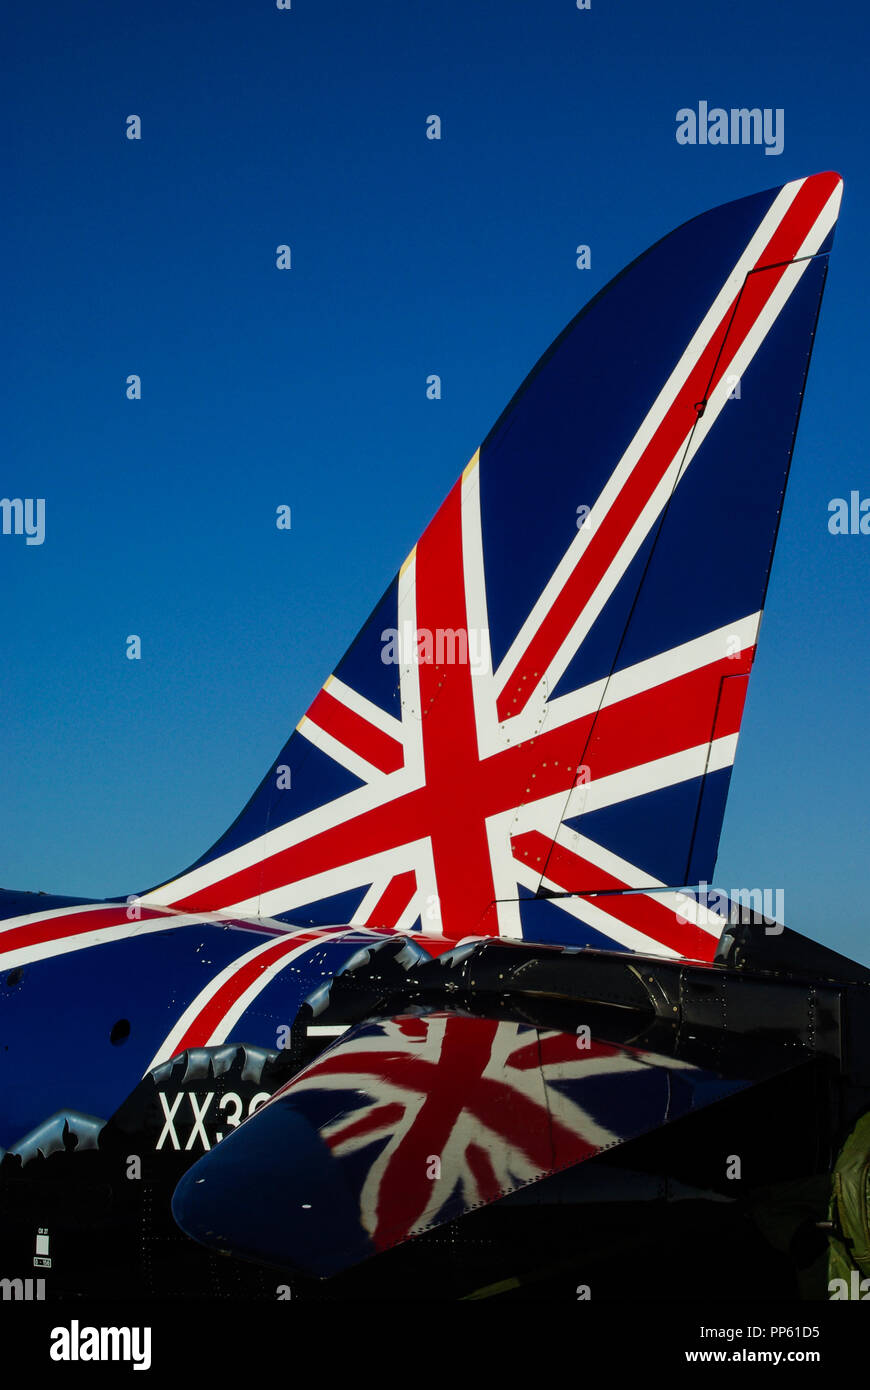 British Union Jack Flag on the tail of a Royal Air Force RAF BAe Hawk T1 jet plane. Reflected on tail plane. Blue sky Stock Photo